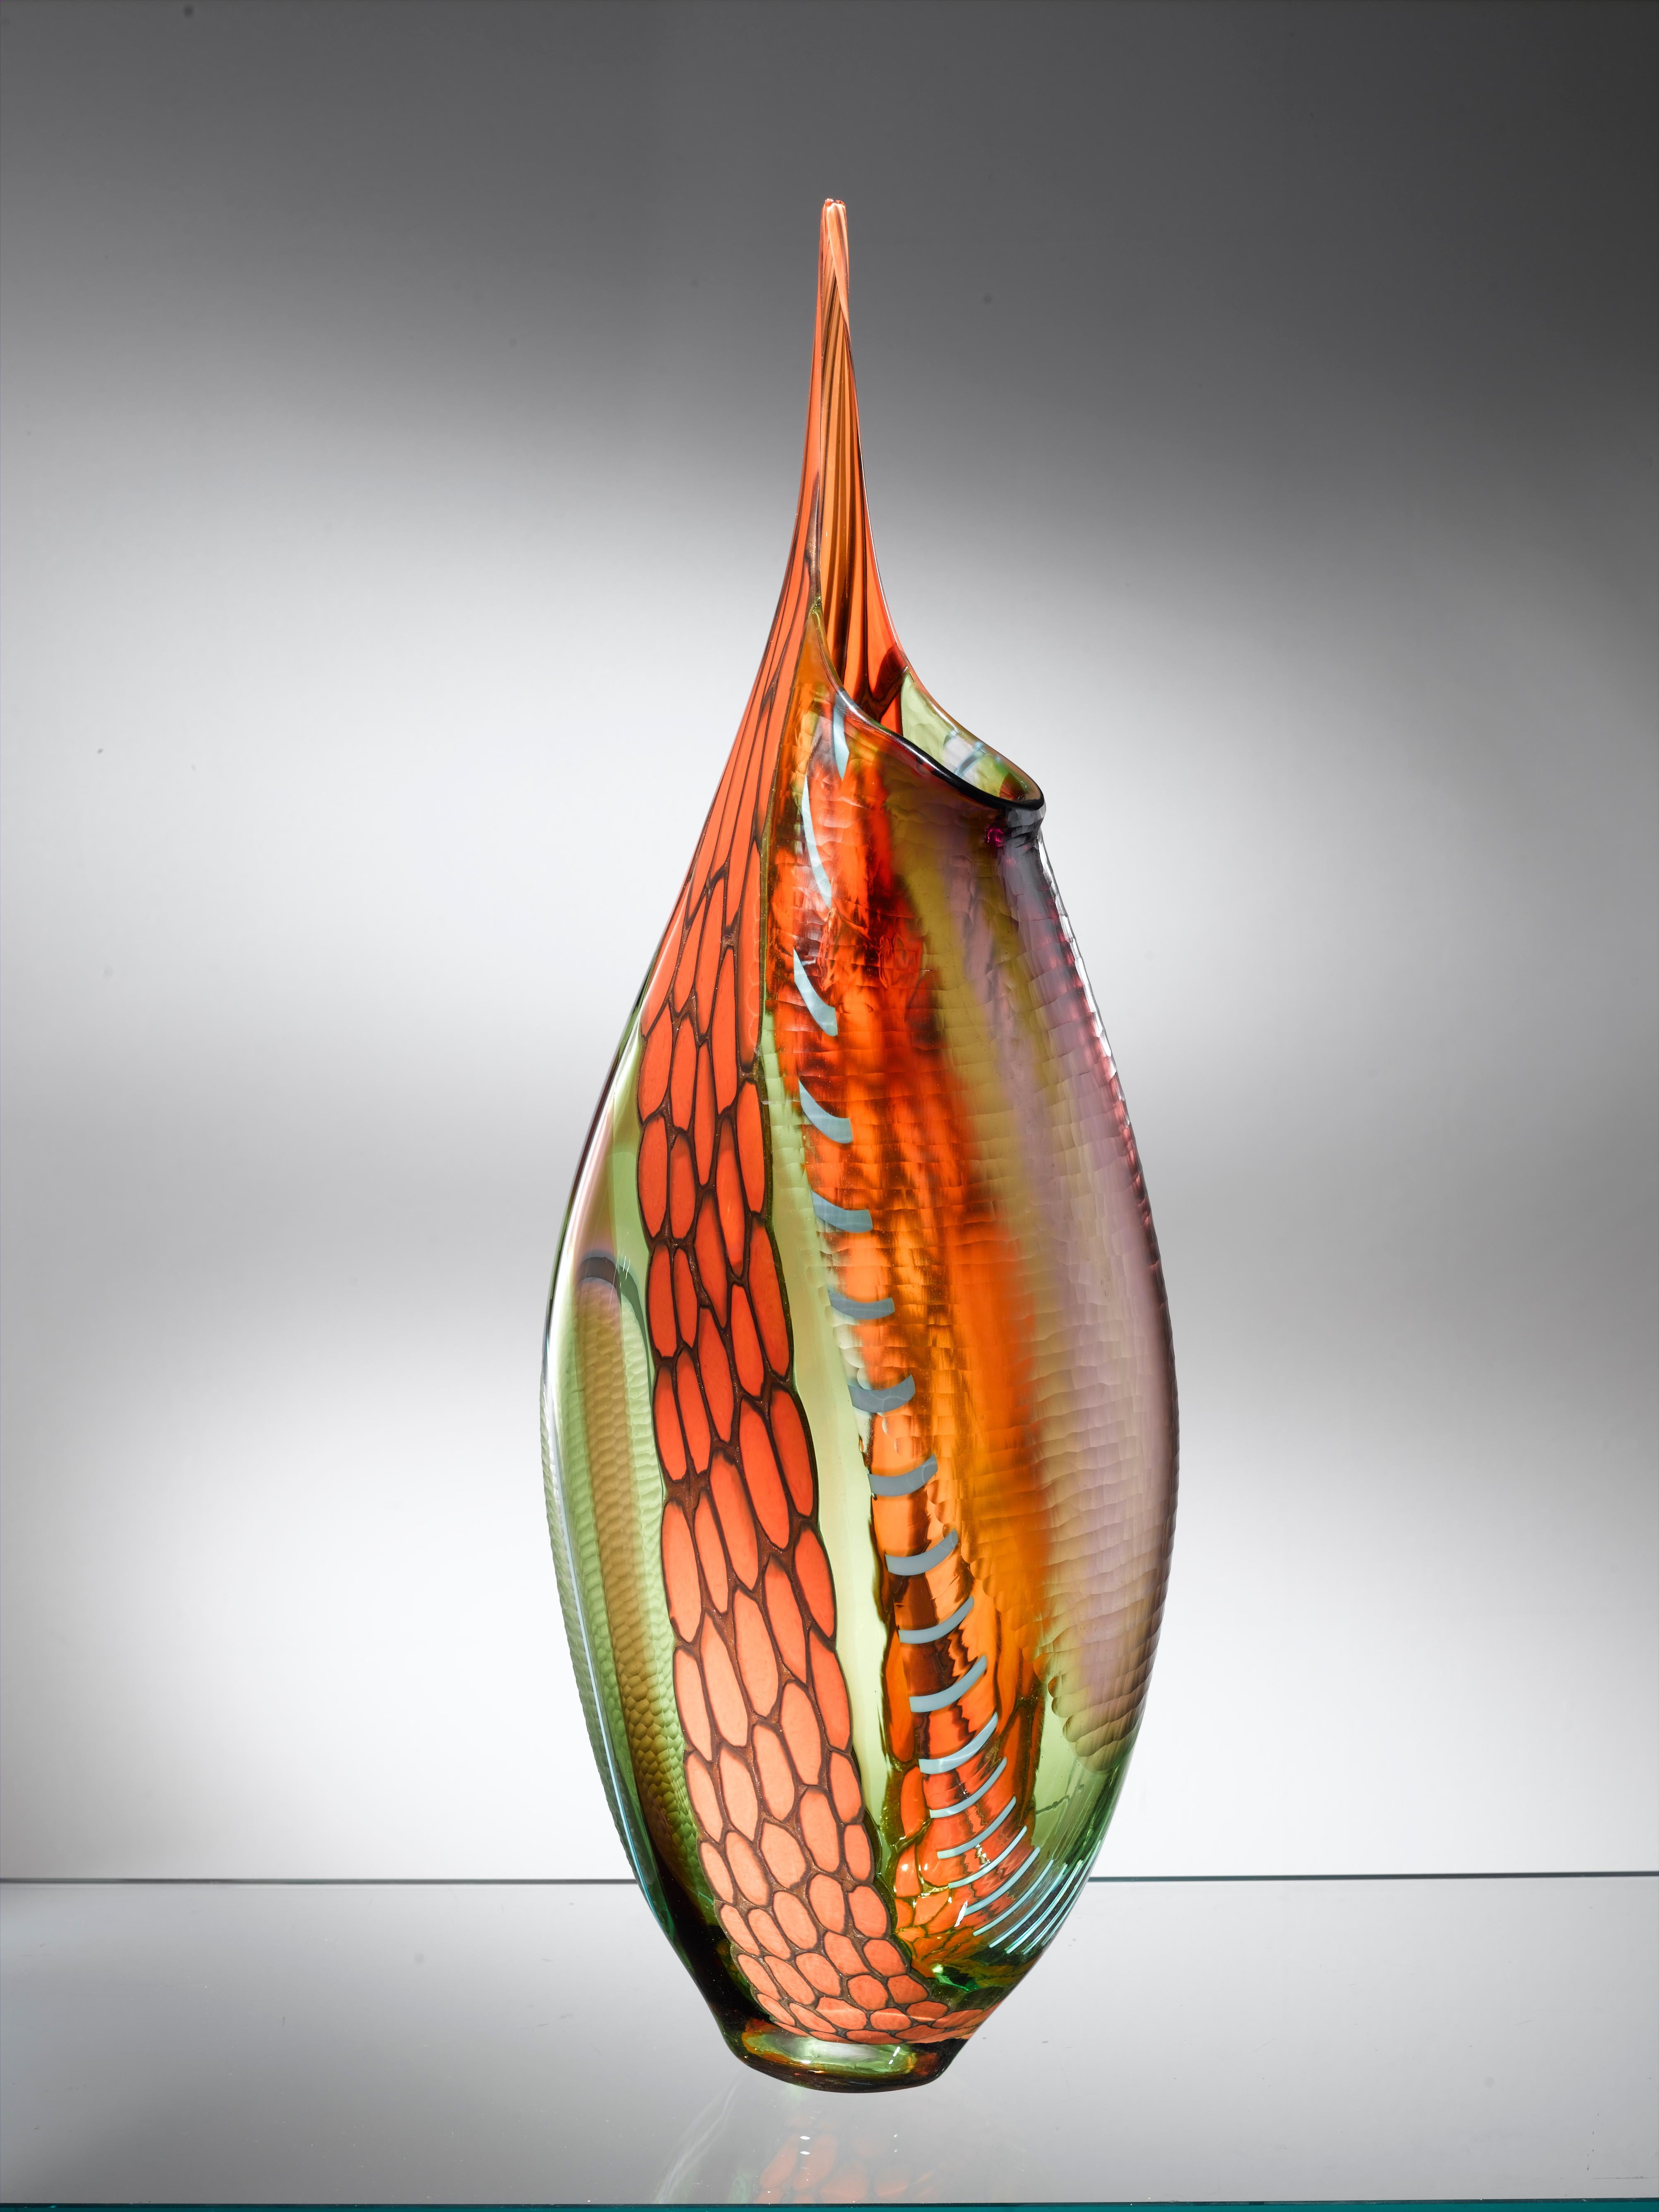 Murano artistic glass. The murano artistic glass sculpture is a creative and natural expression of the artist Eros Raffael, made of murano blown glass by Eros Raffael, in this sculpture they are enclosed in perfect regular shapes: the harmony, and